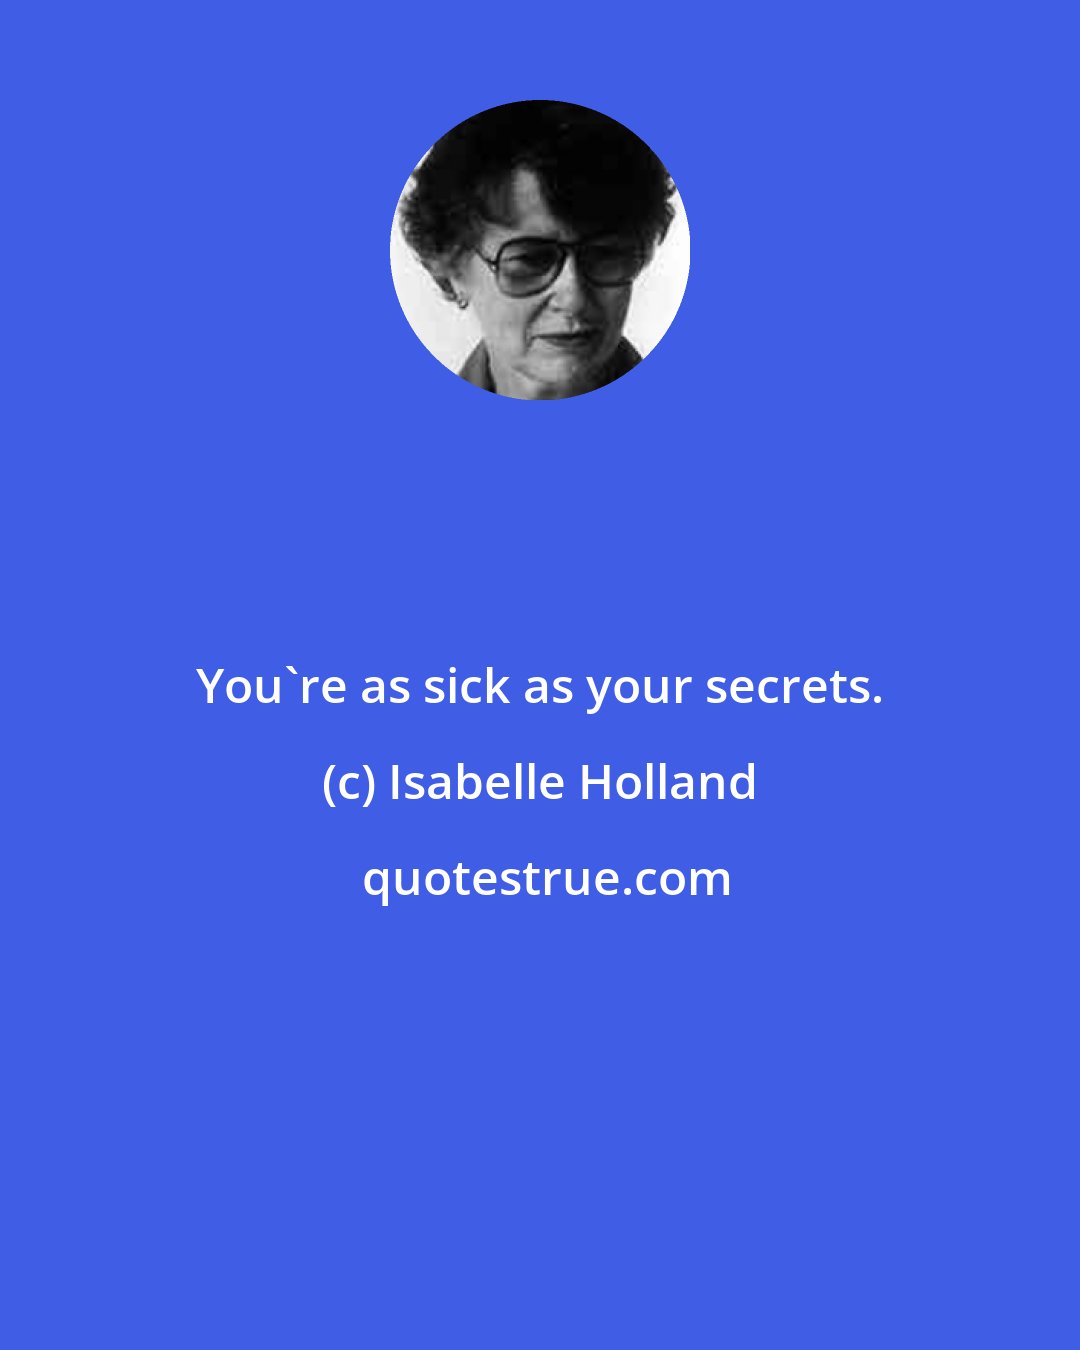 Isabelle Holland: You're as sick as your secrets.